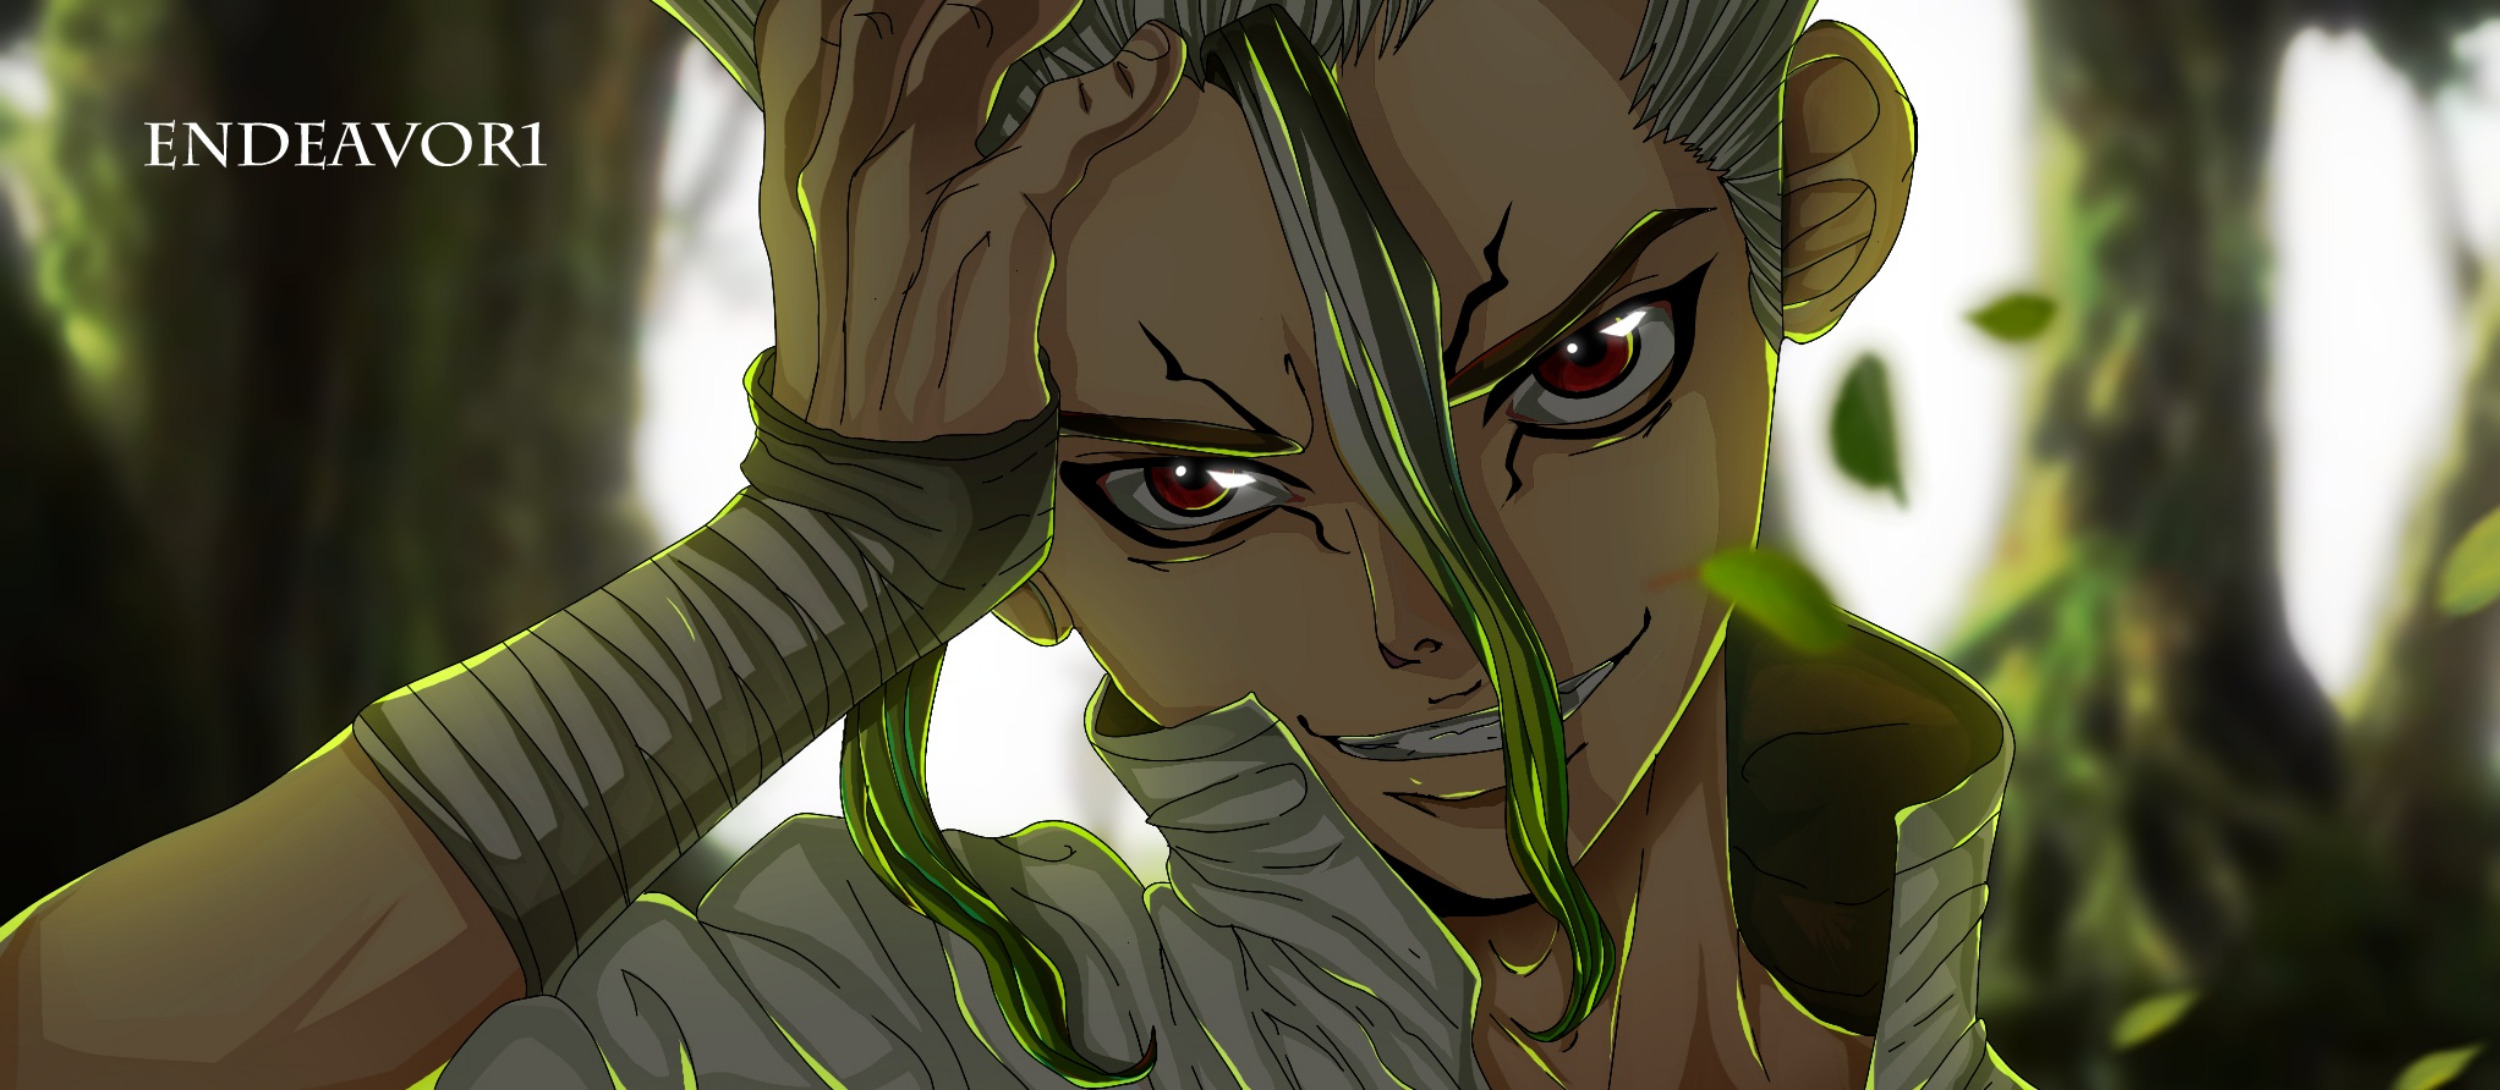 Anime Dr. Stone HD Wallpaper by ENDEAVOR1